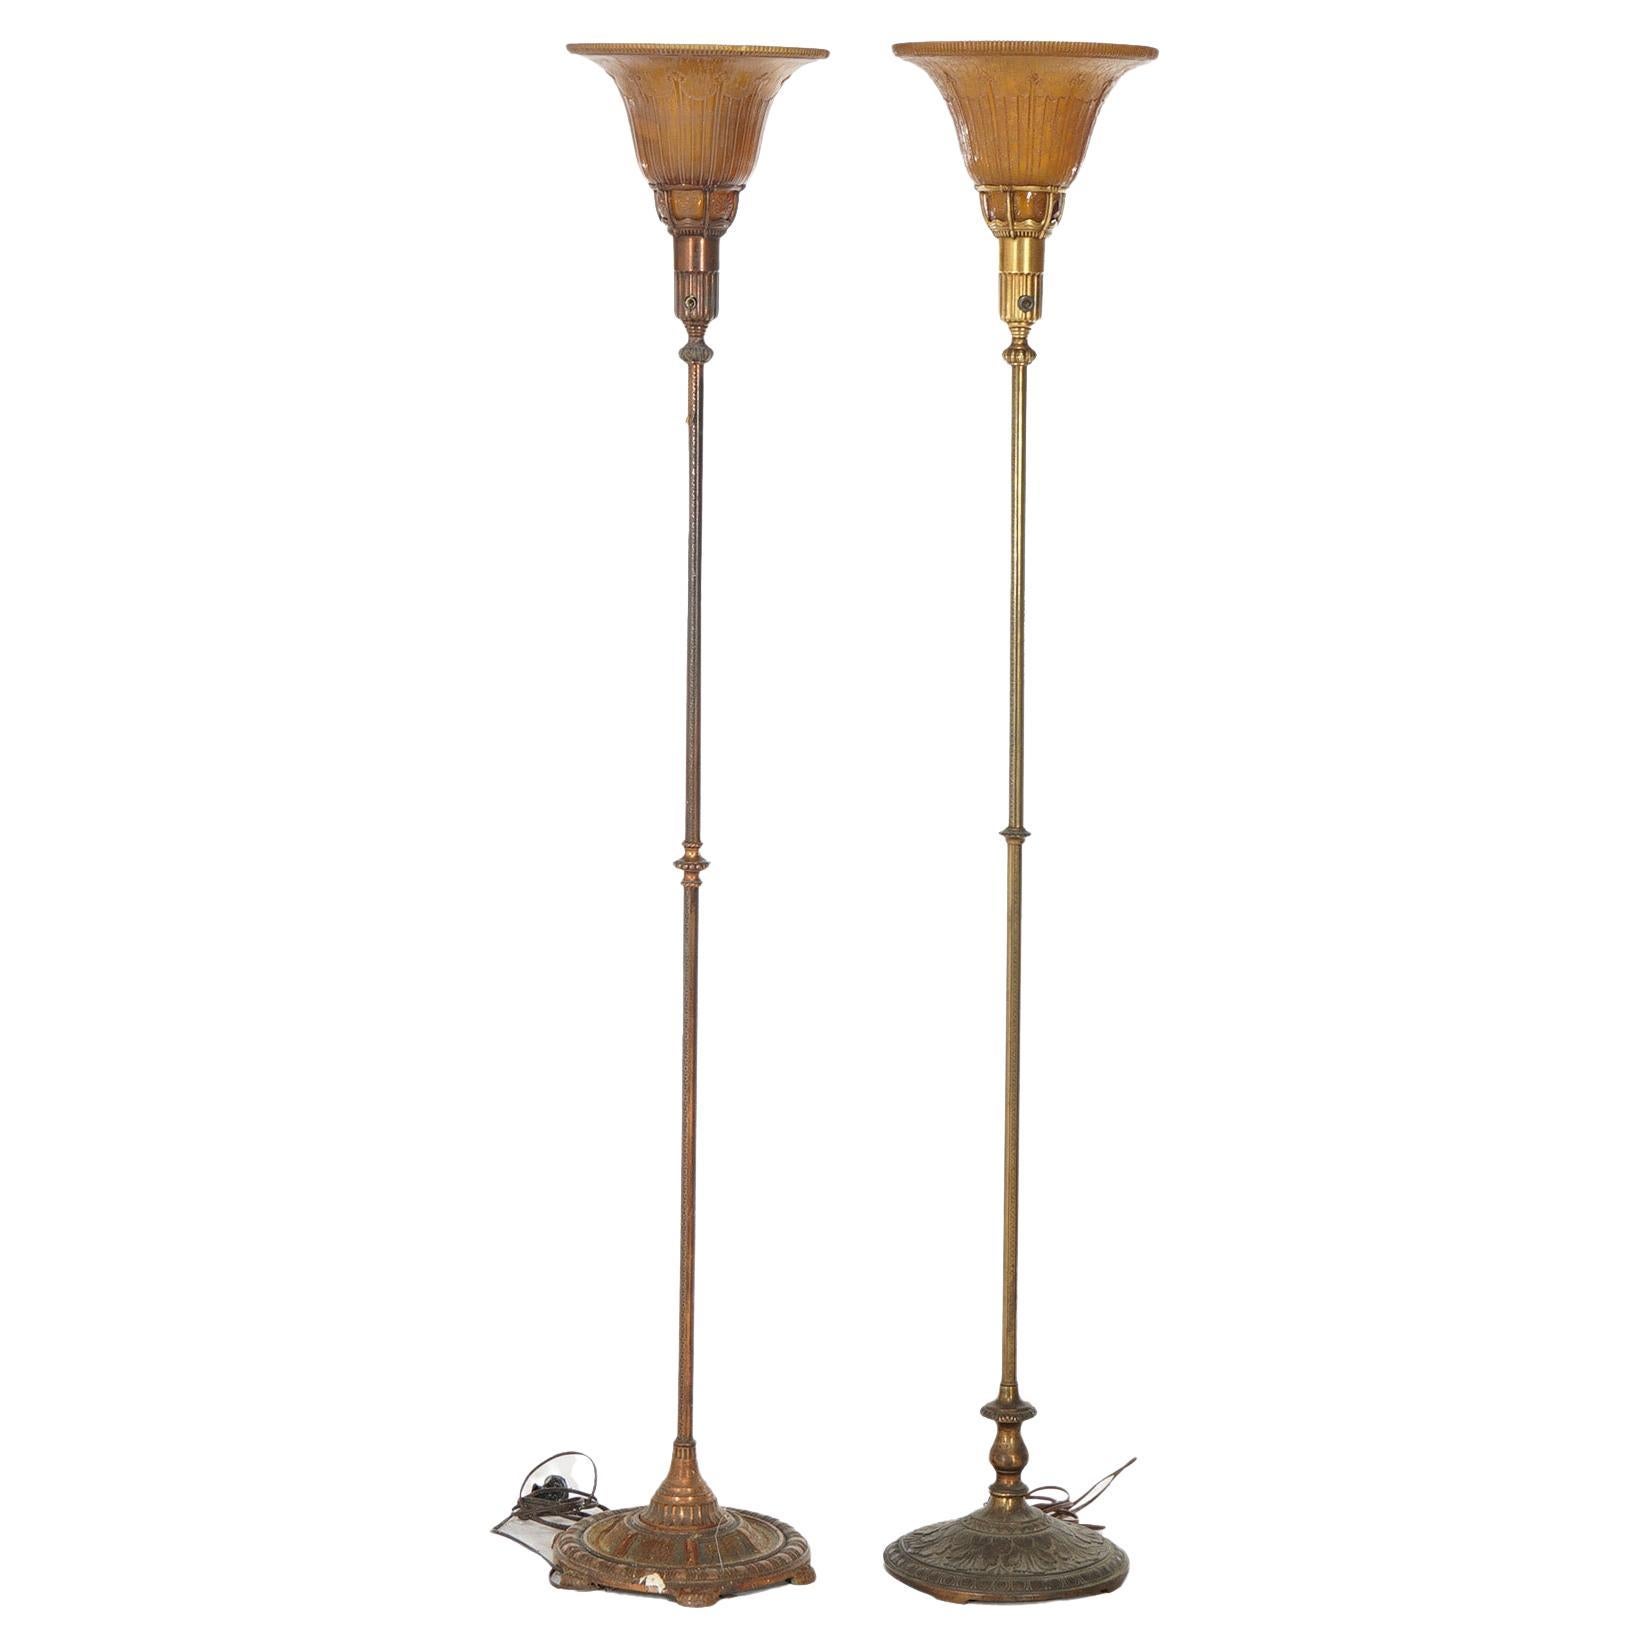 Two Classical Torchiere Gilt Metal & Amber Glass Floor Lamps by Lightolier